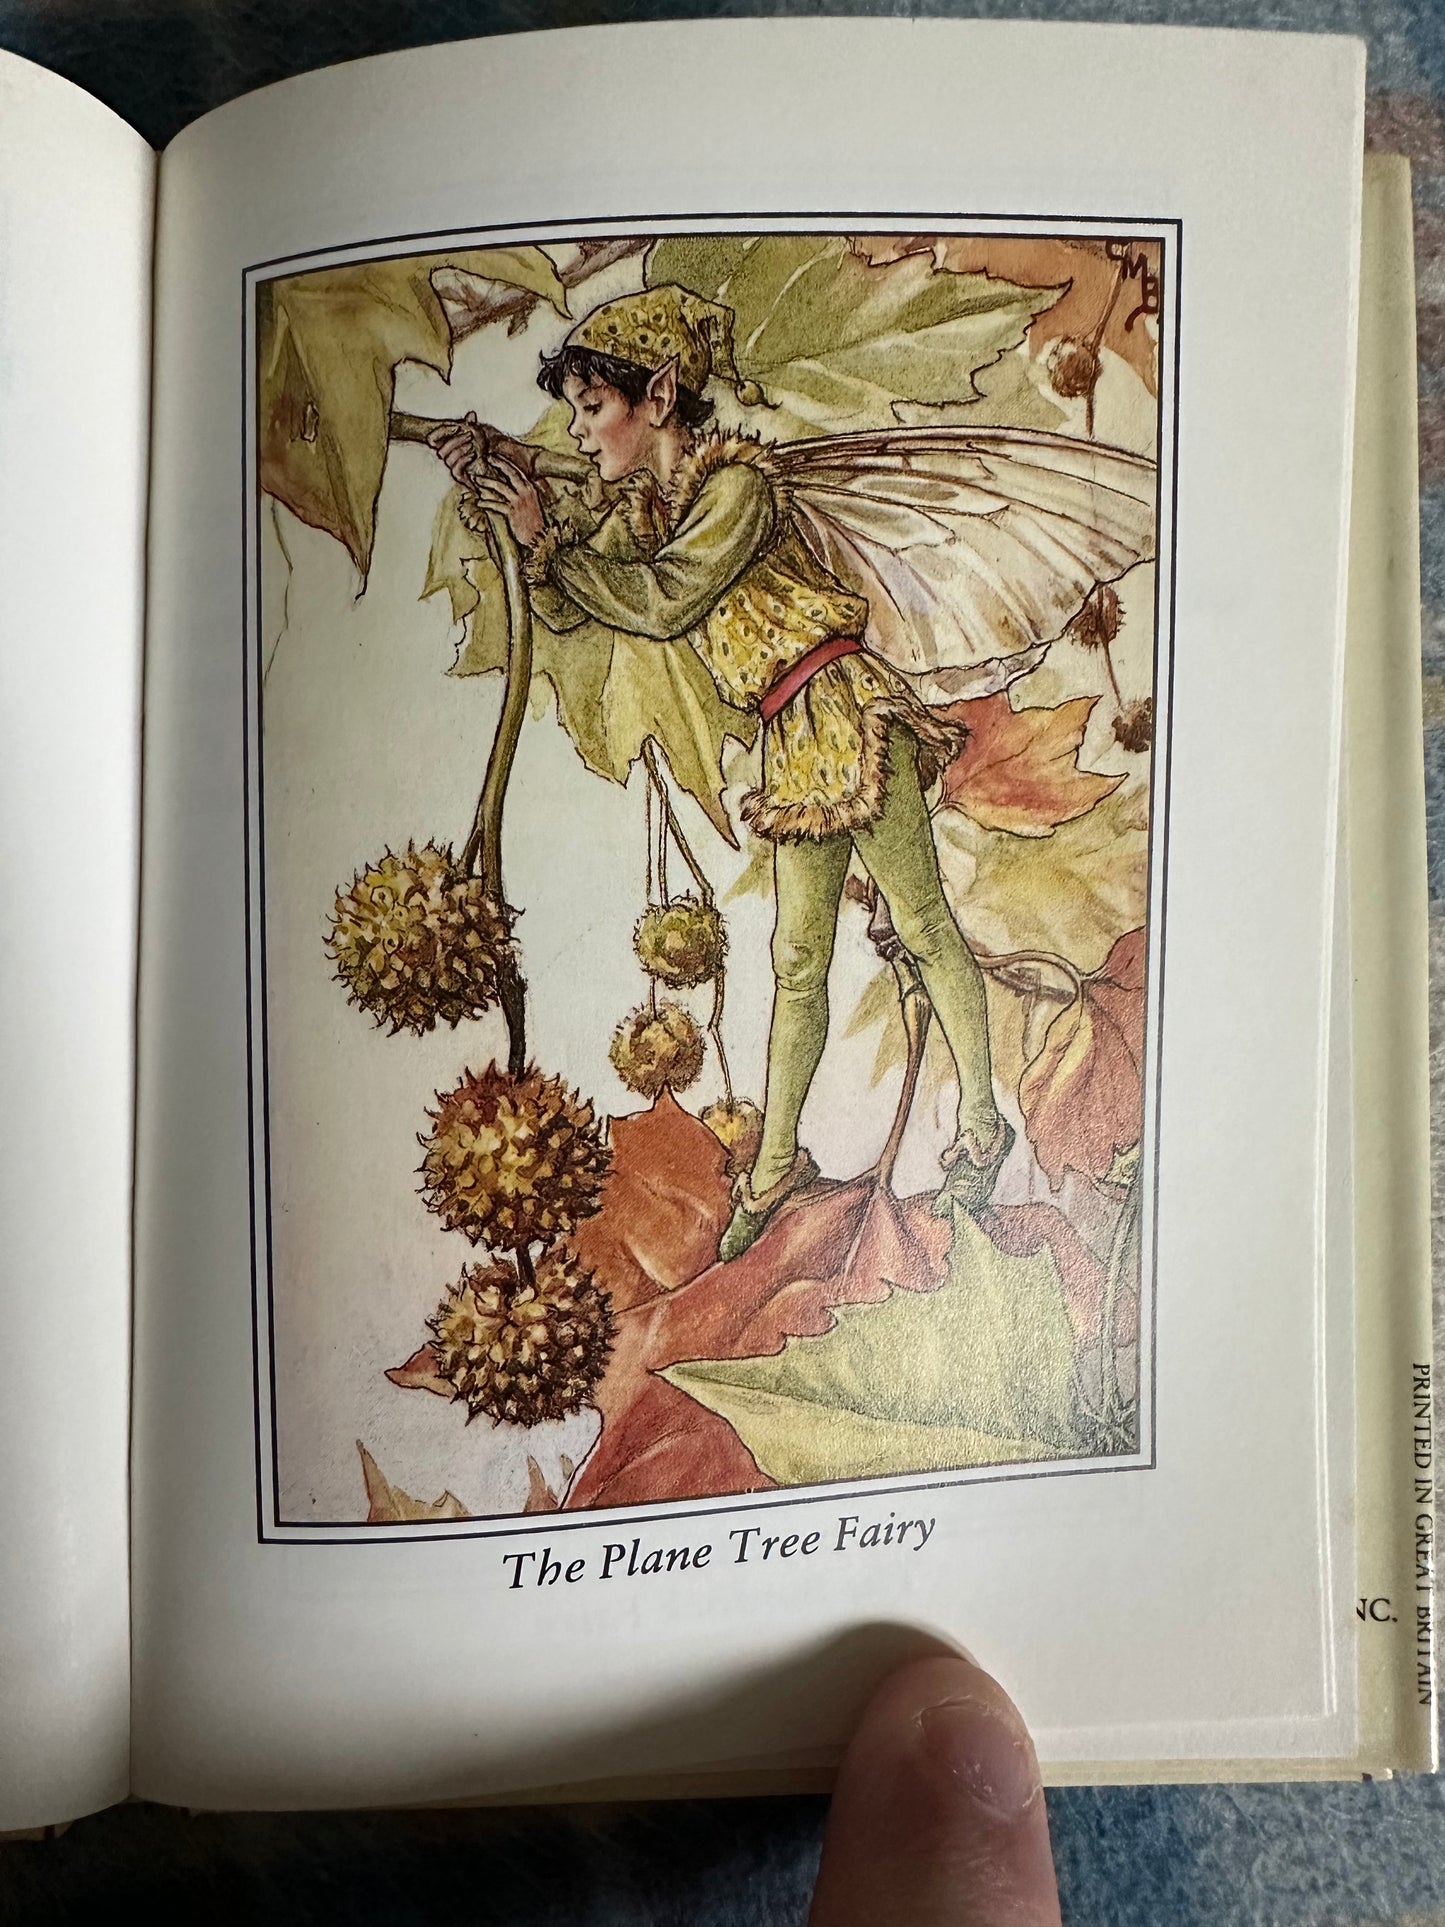 1990 Flower Fairies Of The Winter - Cicely Mary Barker(Frederick Warne & Co Ltd)